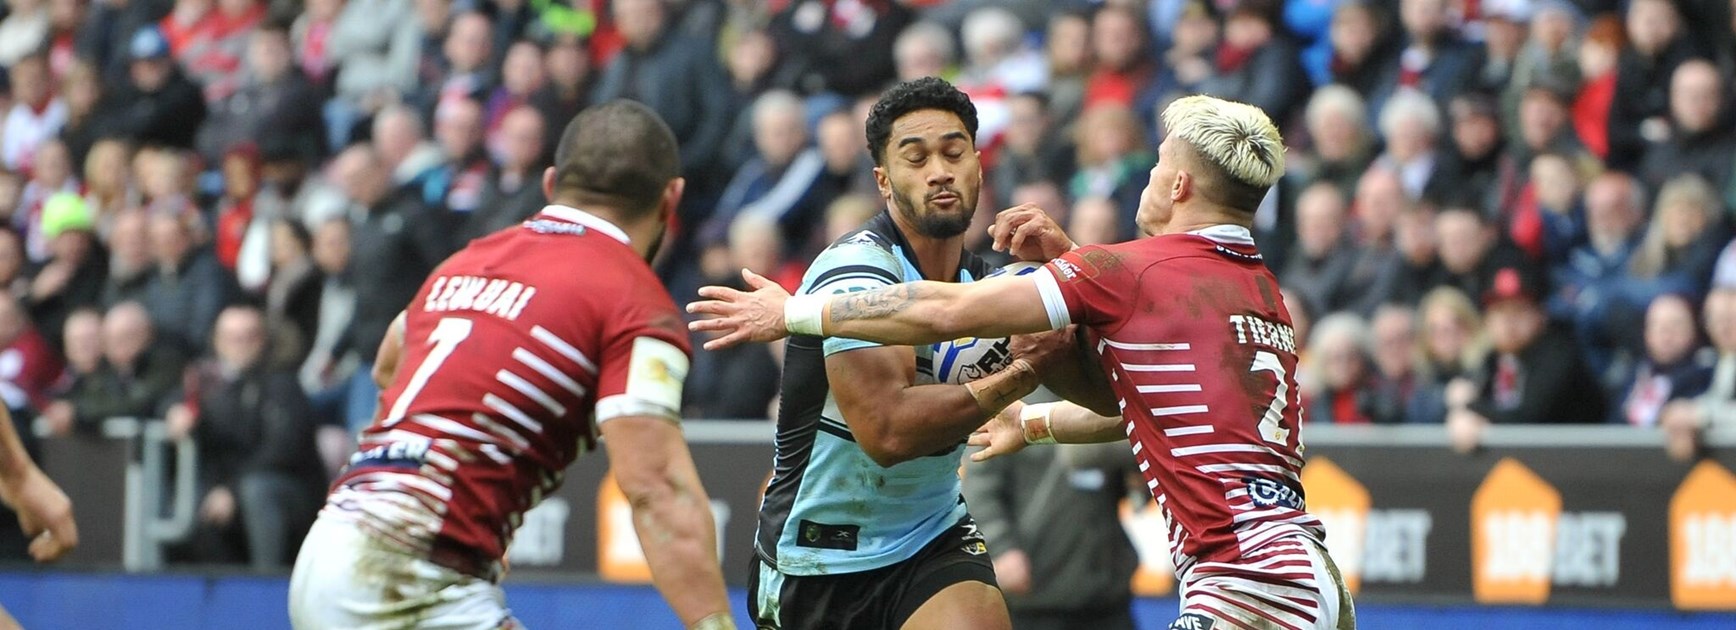 Sharks play host to Wigan